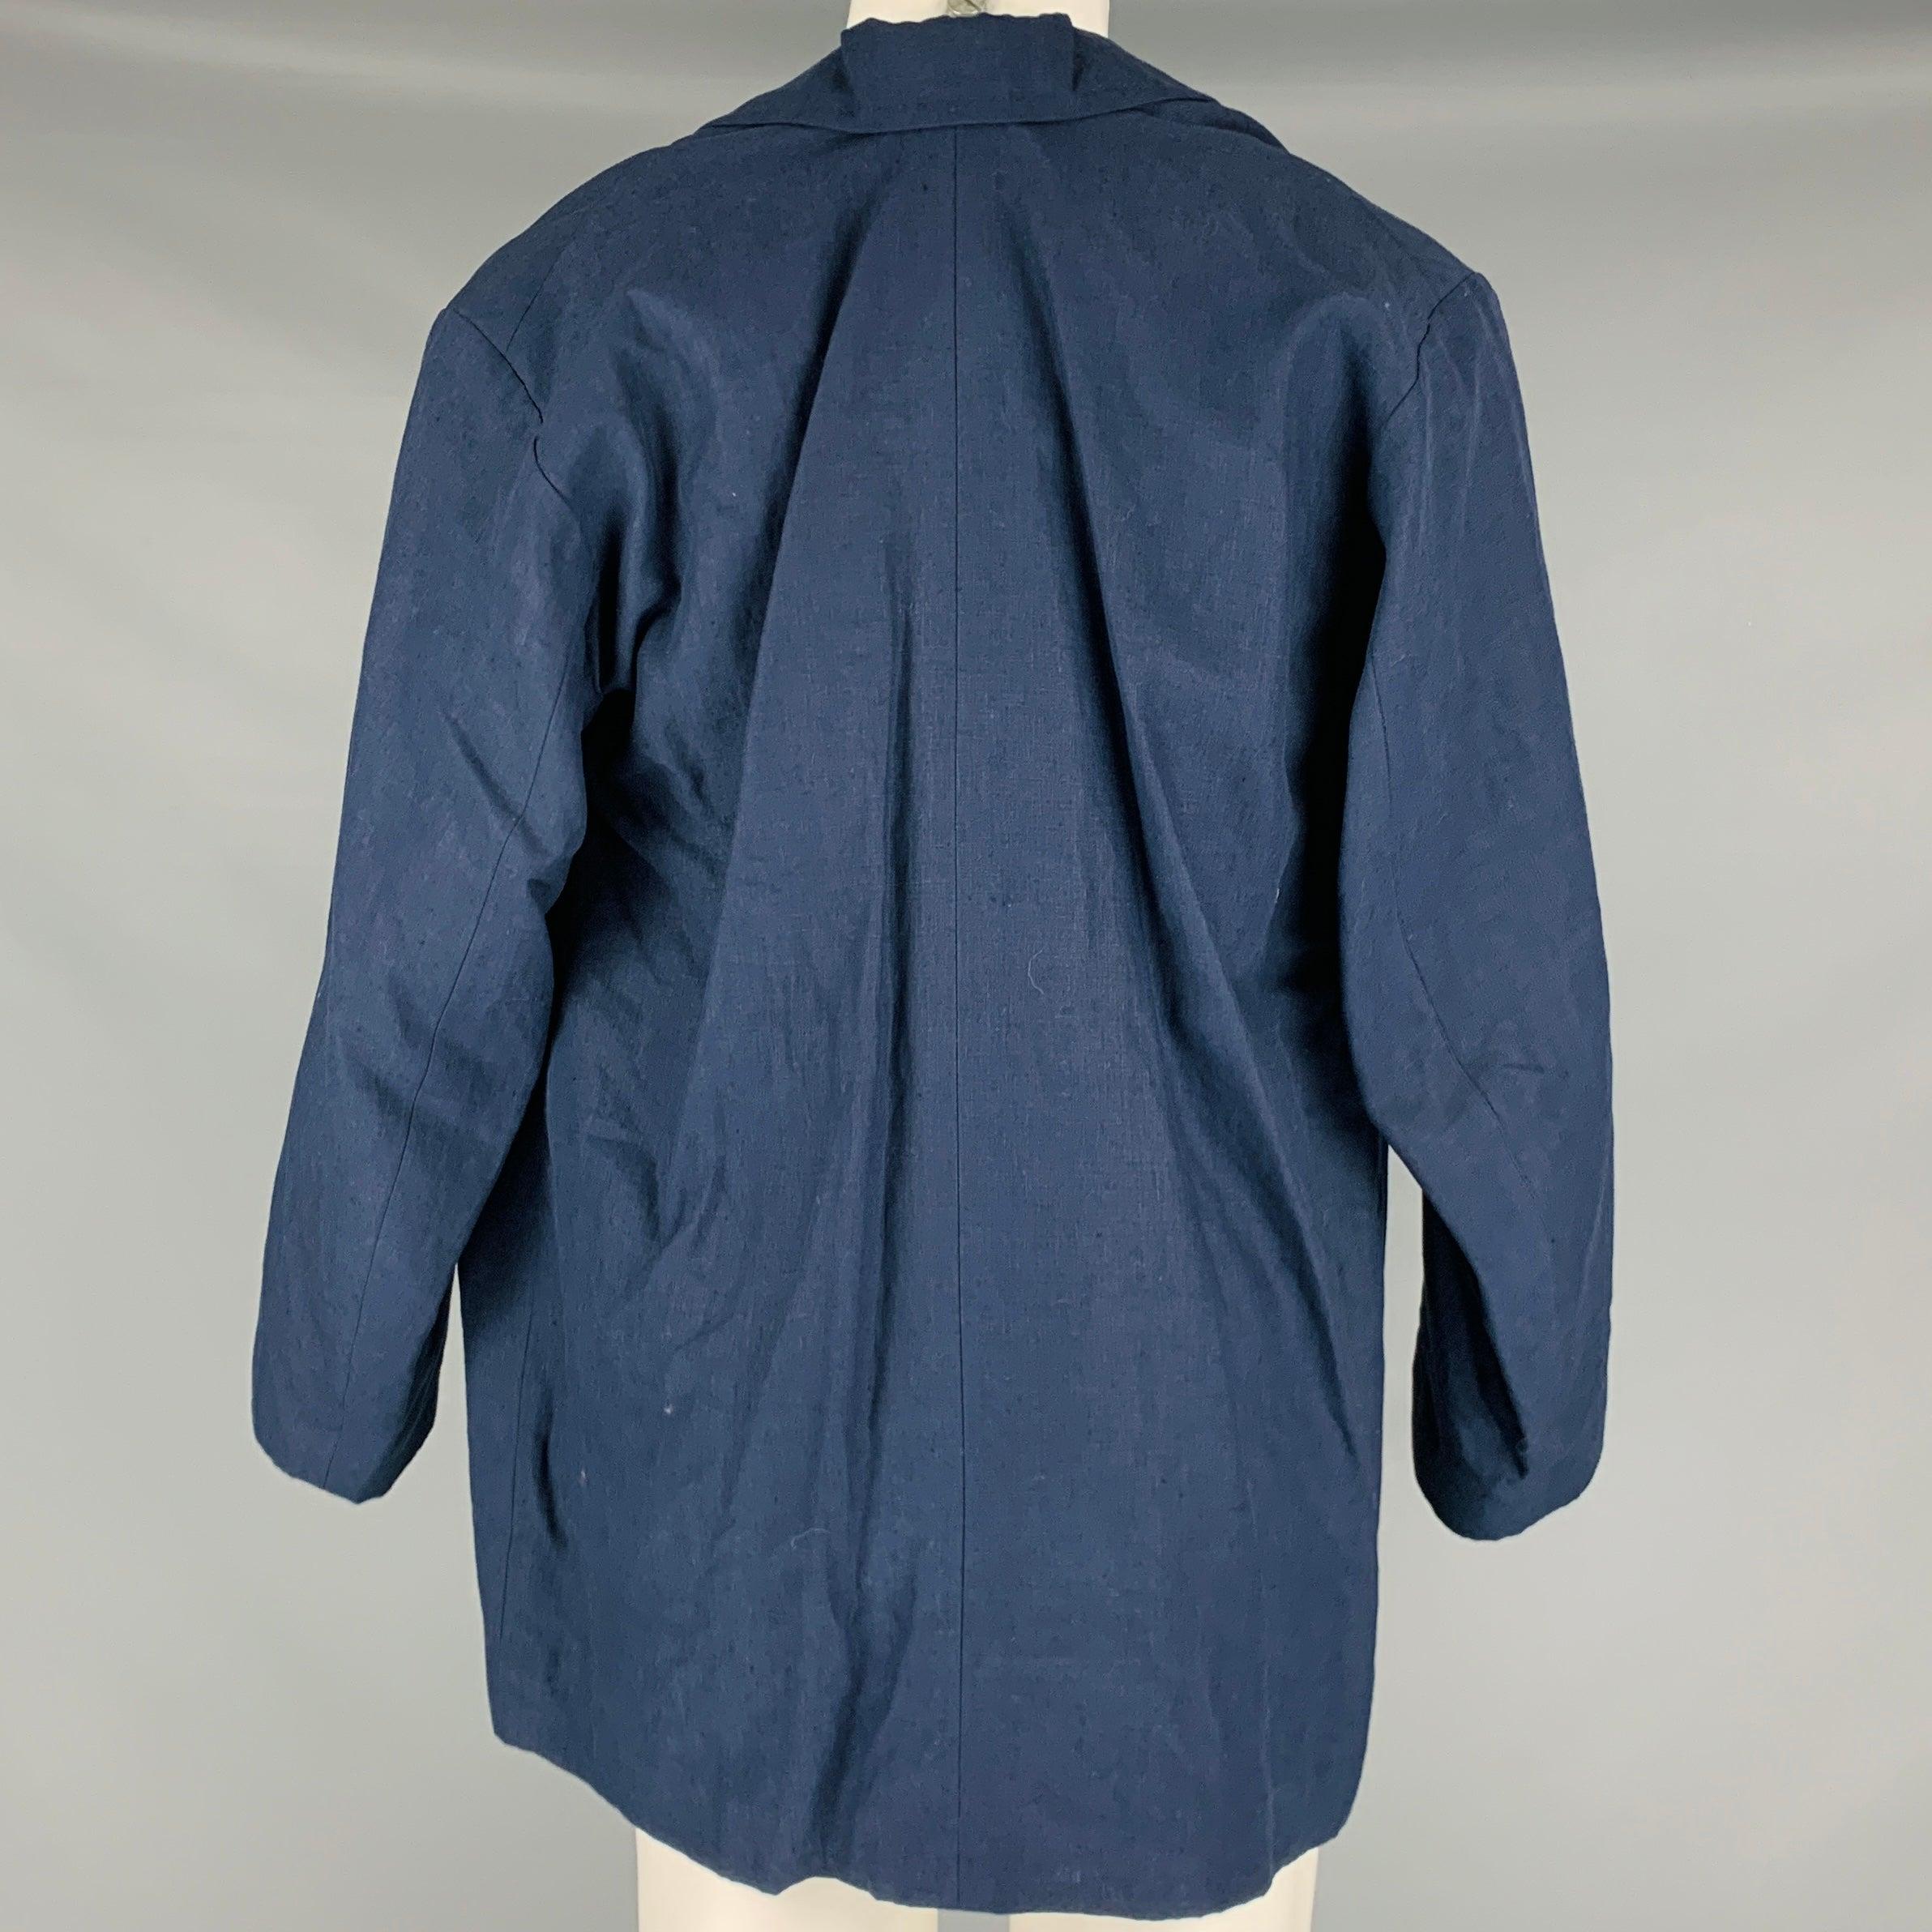 VISVIM -New Hope II- Size M Navy Linen Notch Lapel Sport Coat In Excellent Condition For Sale In San Francisco, CA